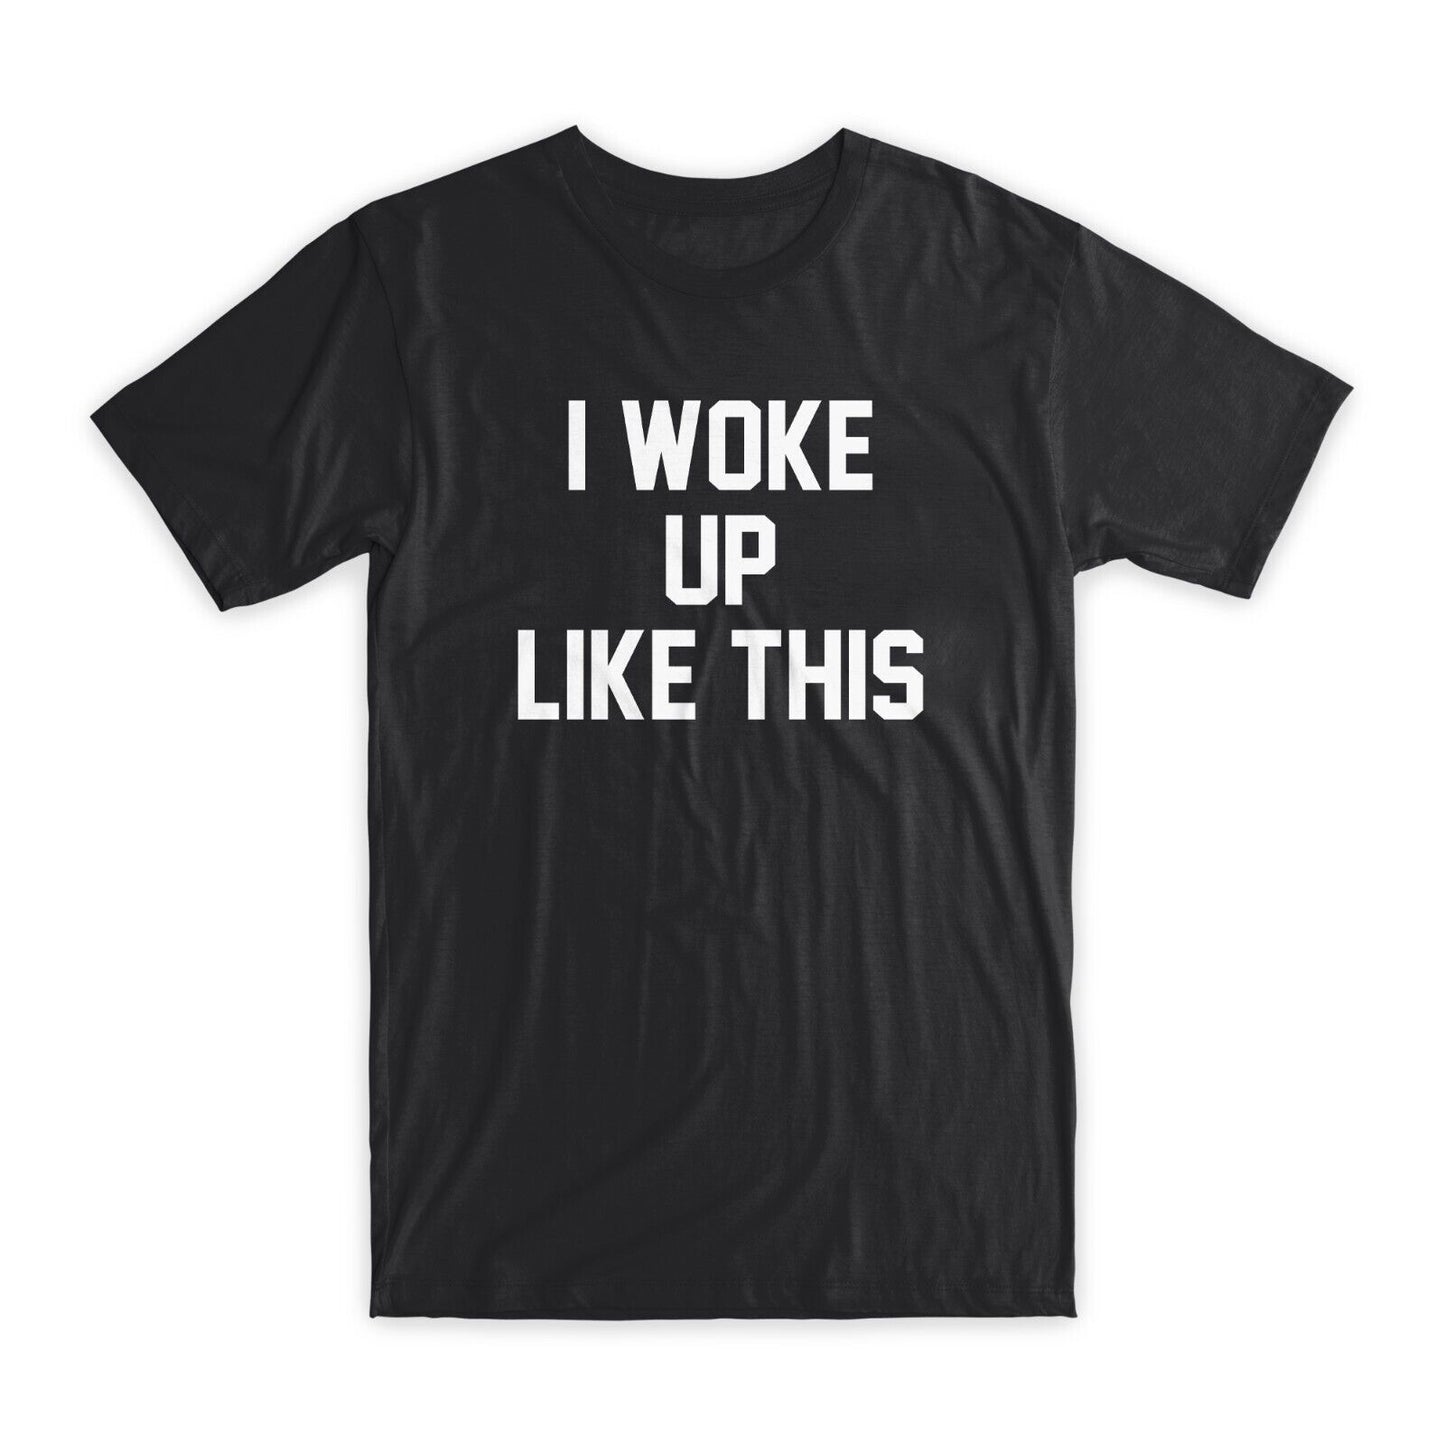 I Woke Up Like This T-Shirt Premium Soft Cotton Crew Neck Funny Tees Gifts NEW